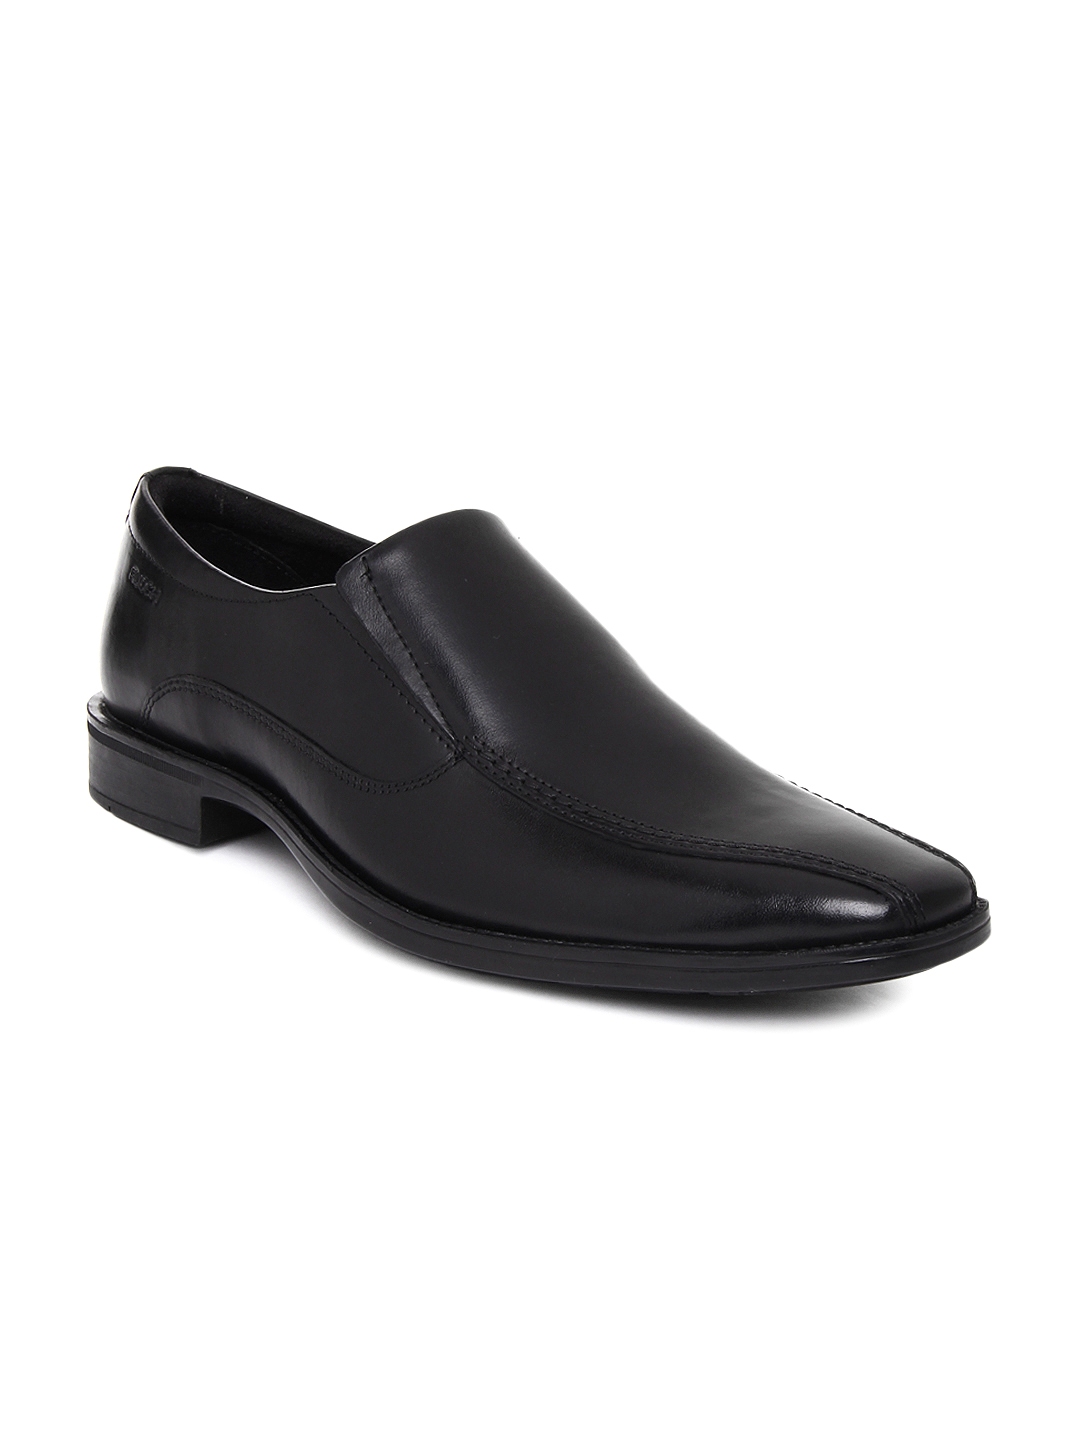 Buy Ruosh Work Contemporary Men Black Leather Slip On Shoes - Formal ...